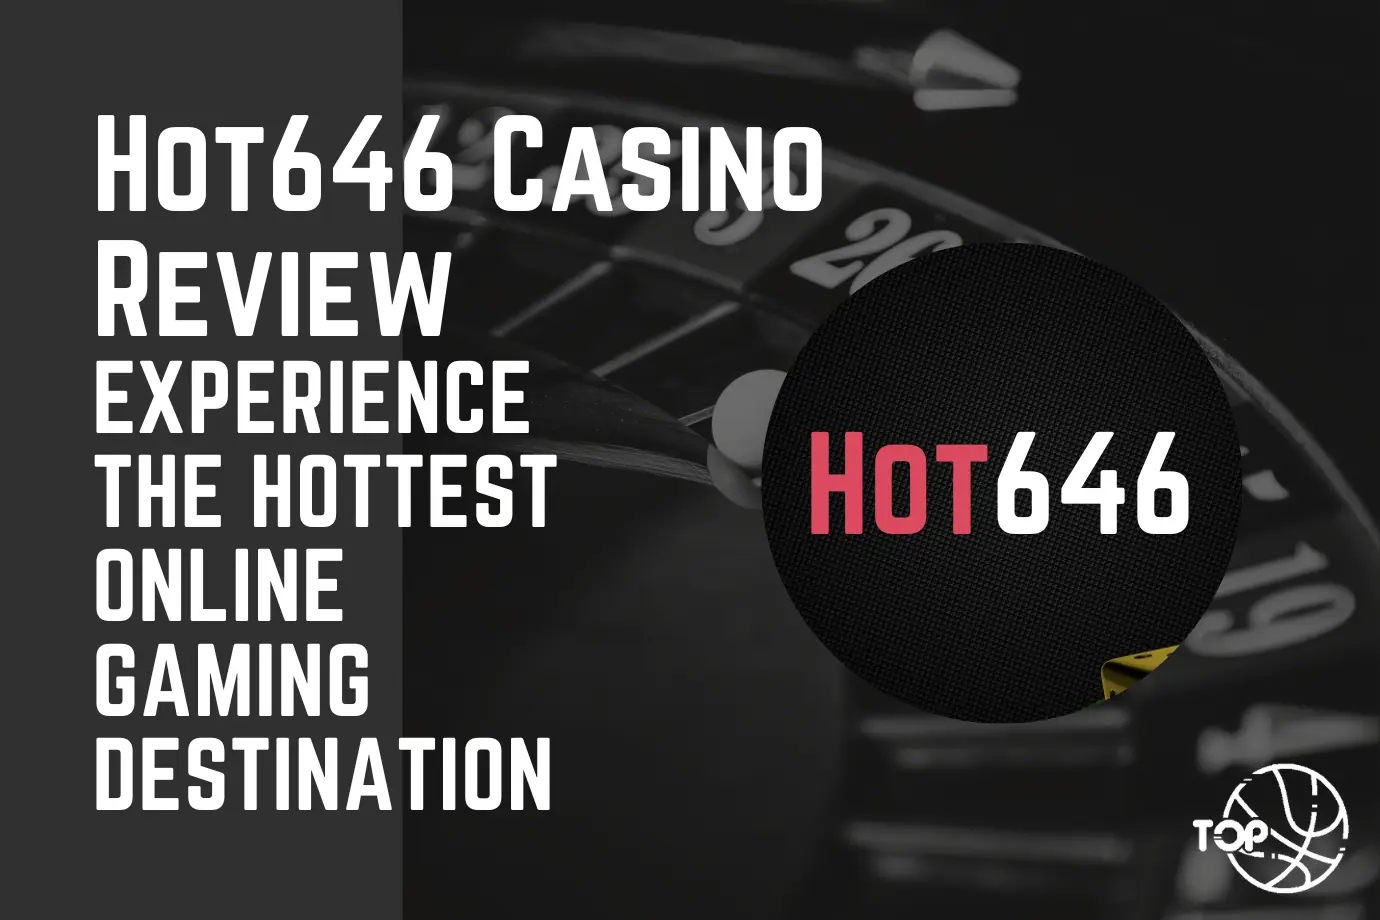 Hot646 Casino Review: Experience the Hottest Online Gaming Destination